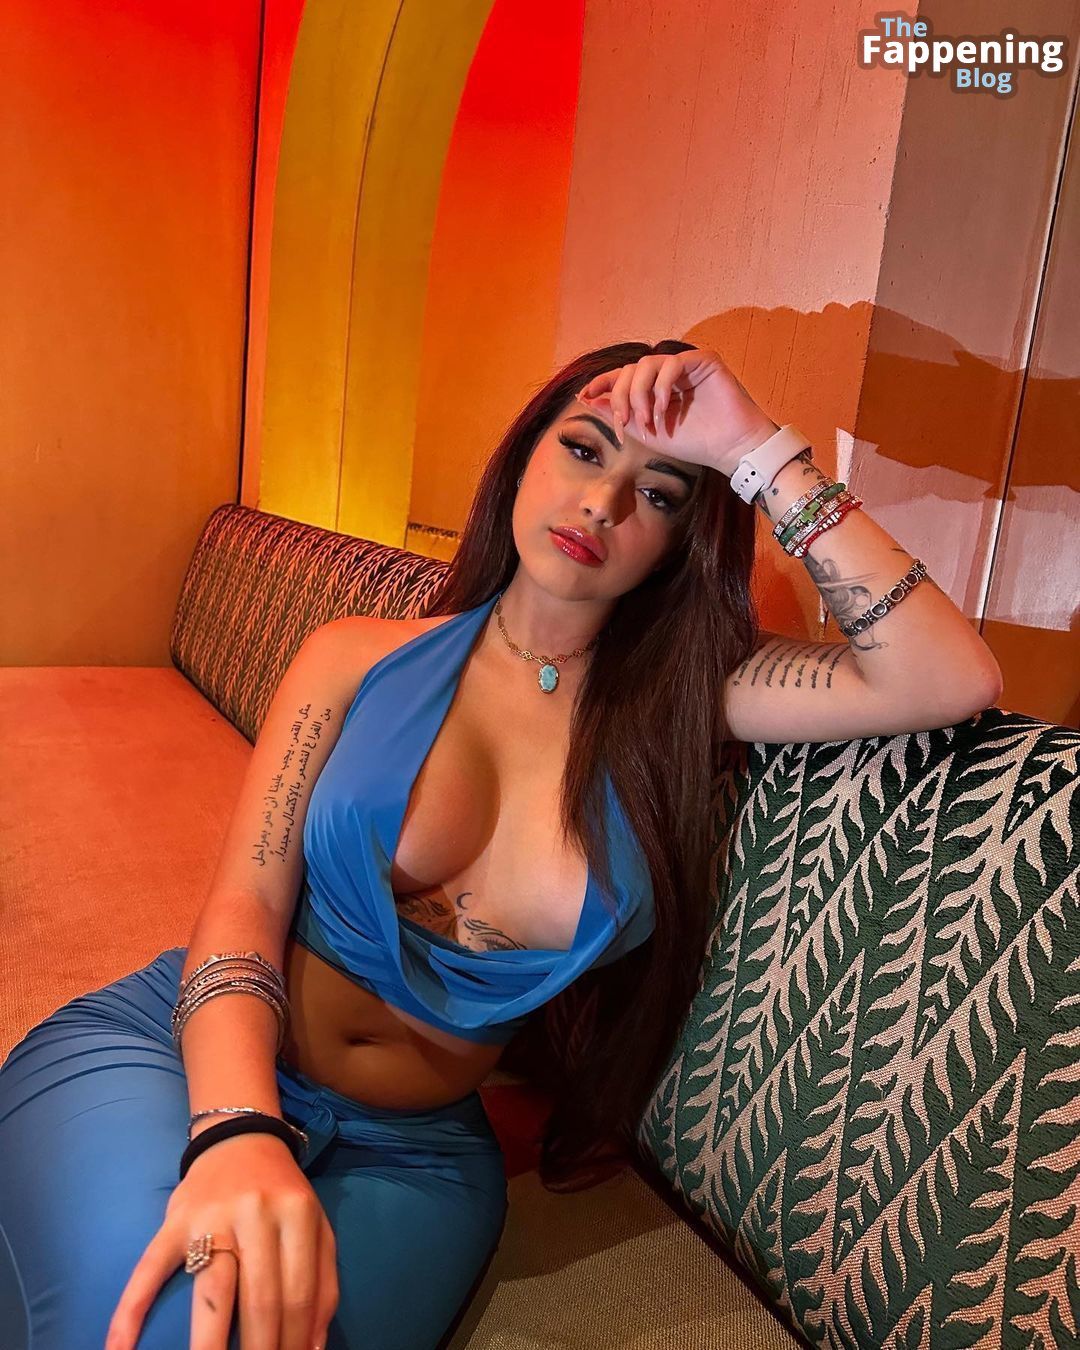 malu-trevejo-blue-outfit-boobs-cleavage-6-thefappeningblog.com_.jpg